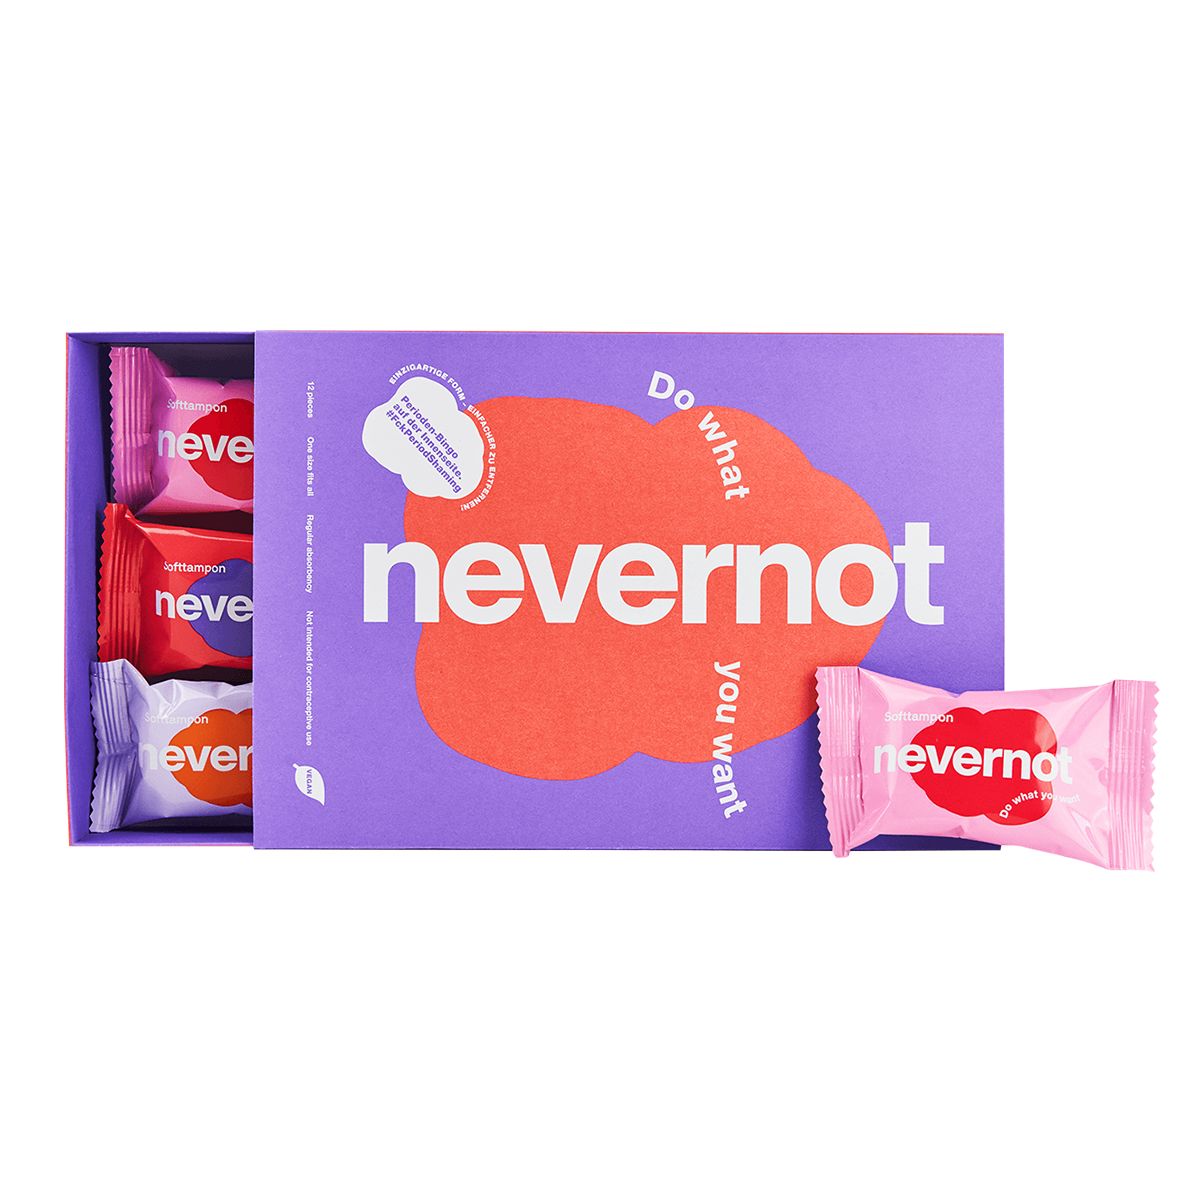 nevernot Soft-Tampons - Box